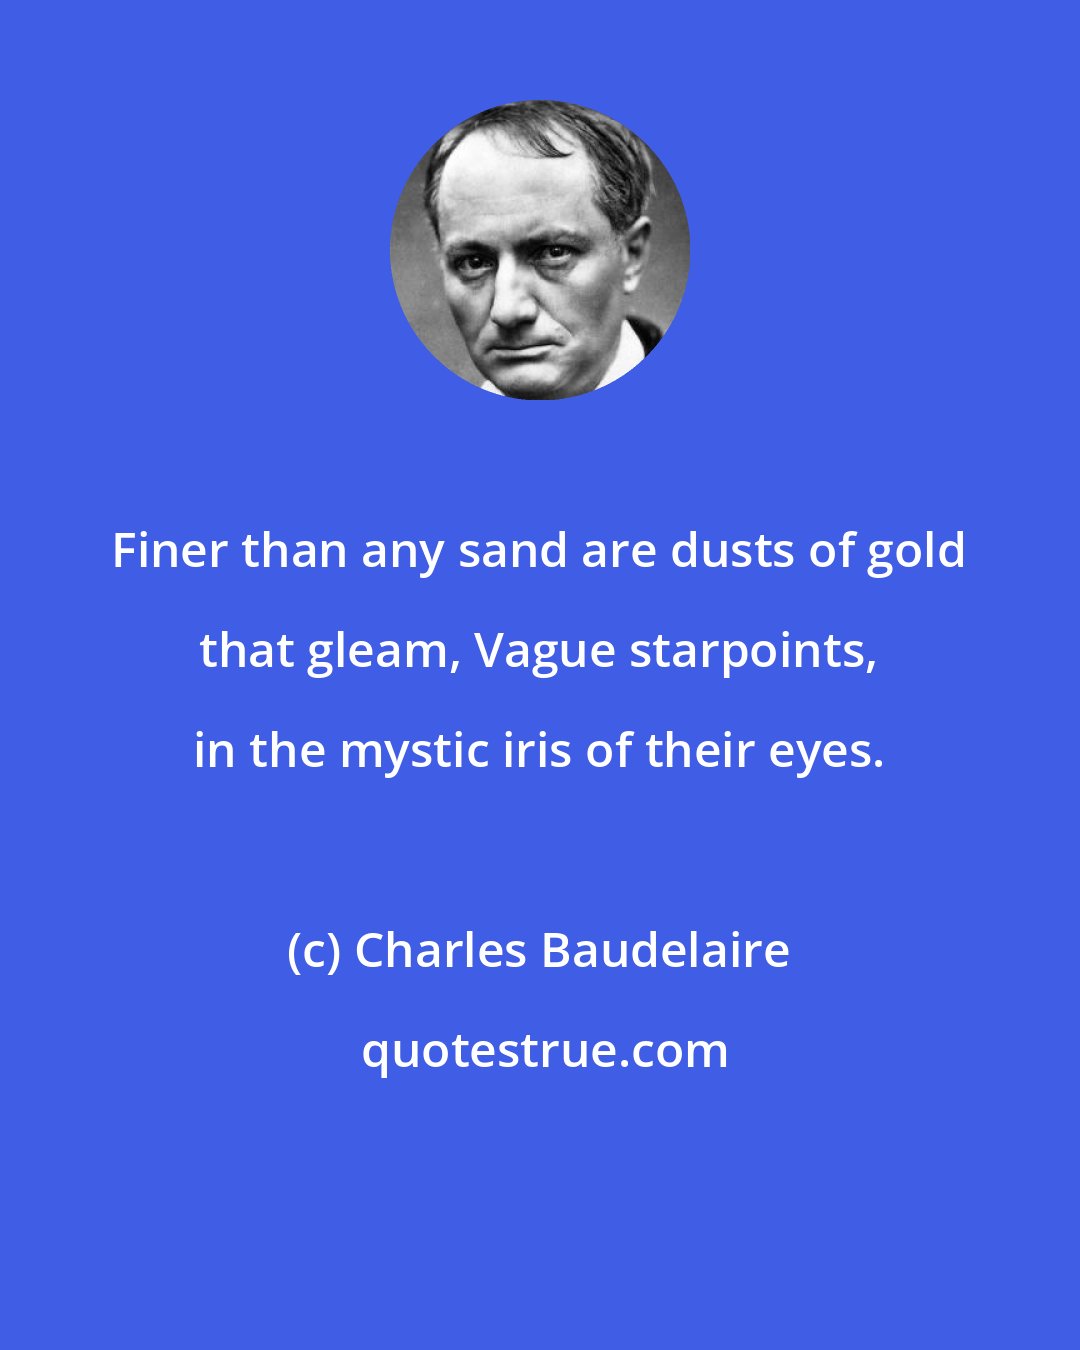 Charles Baudelaire: Finer than any sand are dusts of gold that gleam, Vague starpoints, in the mystic iris of their eyes.